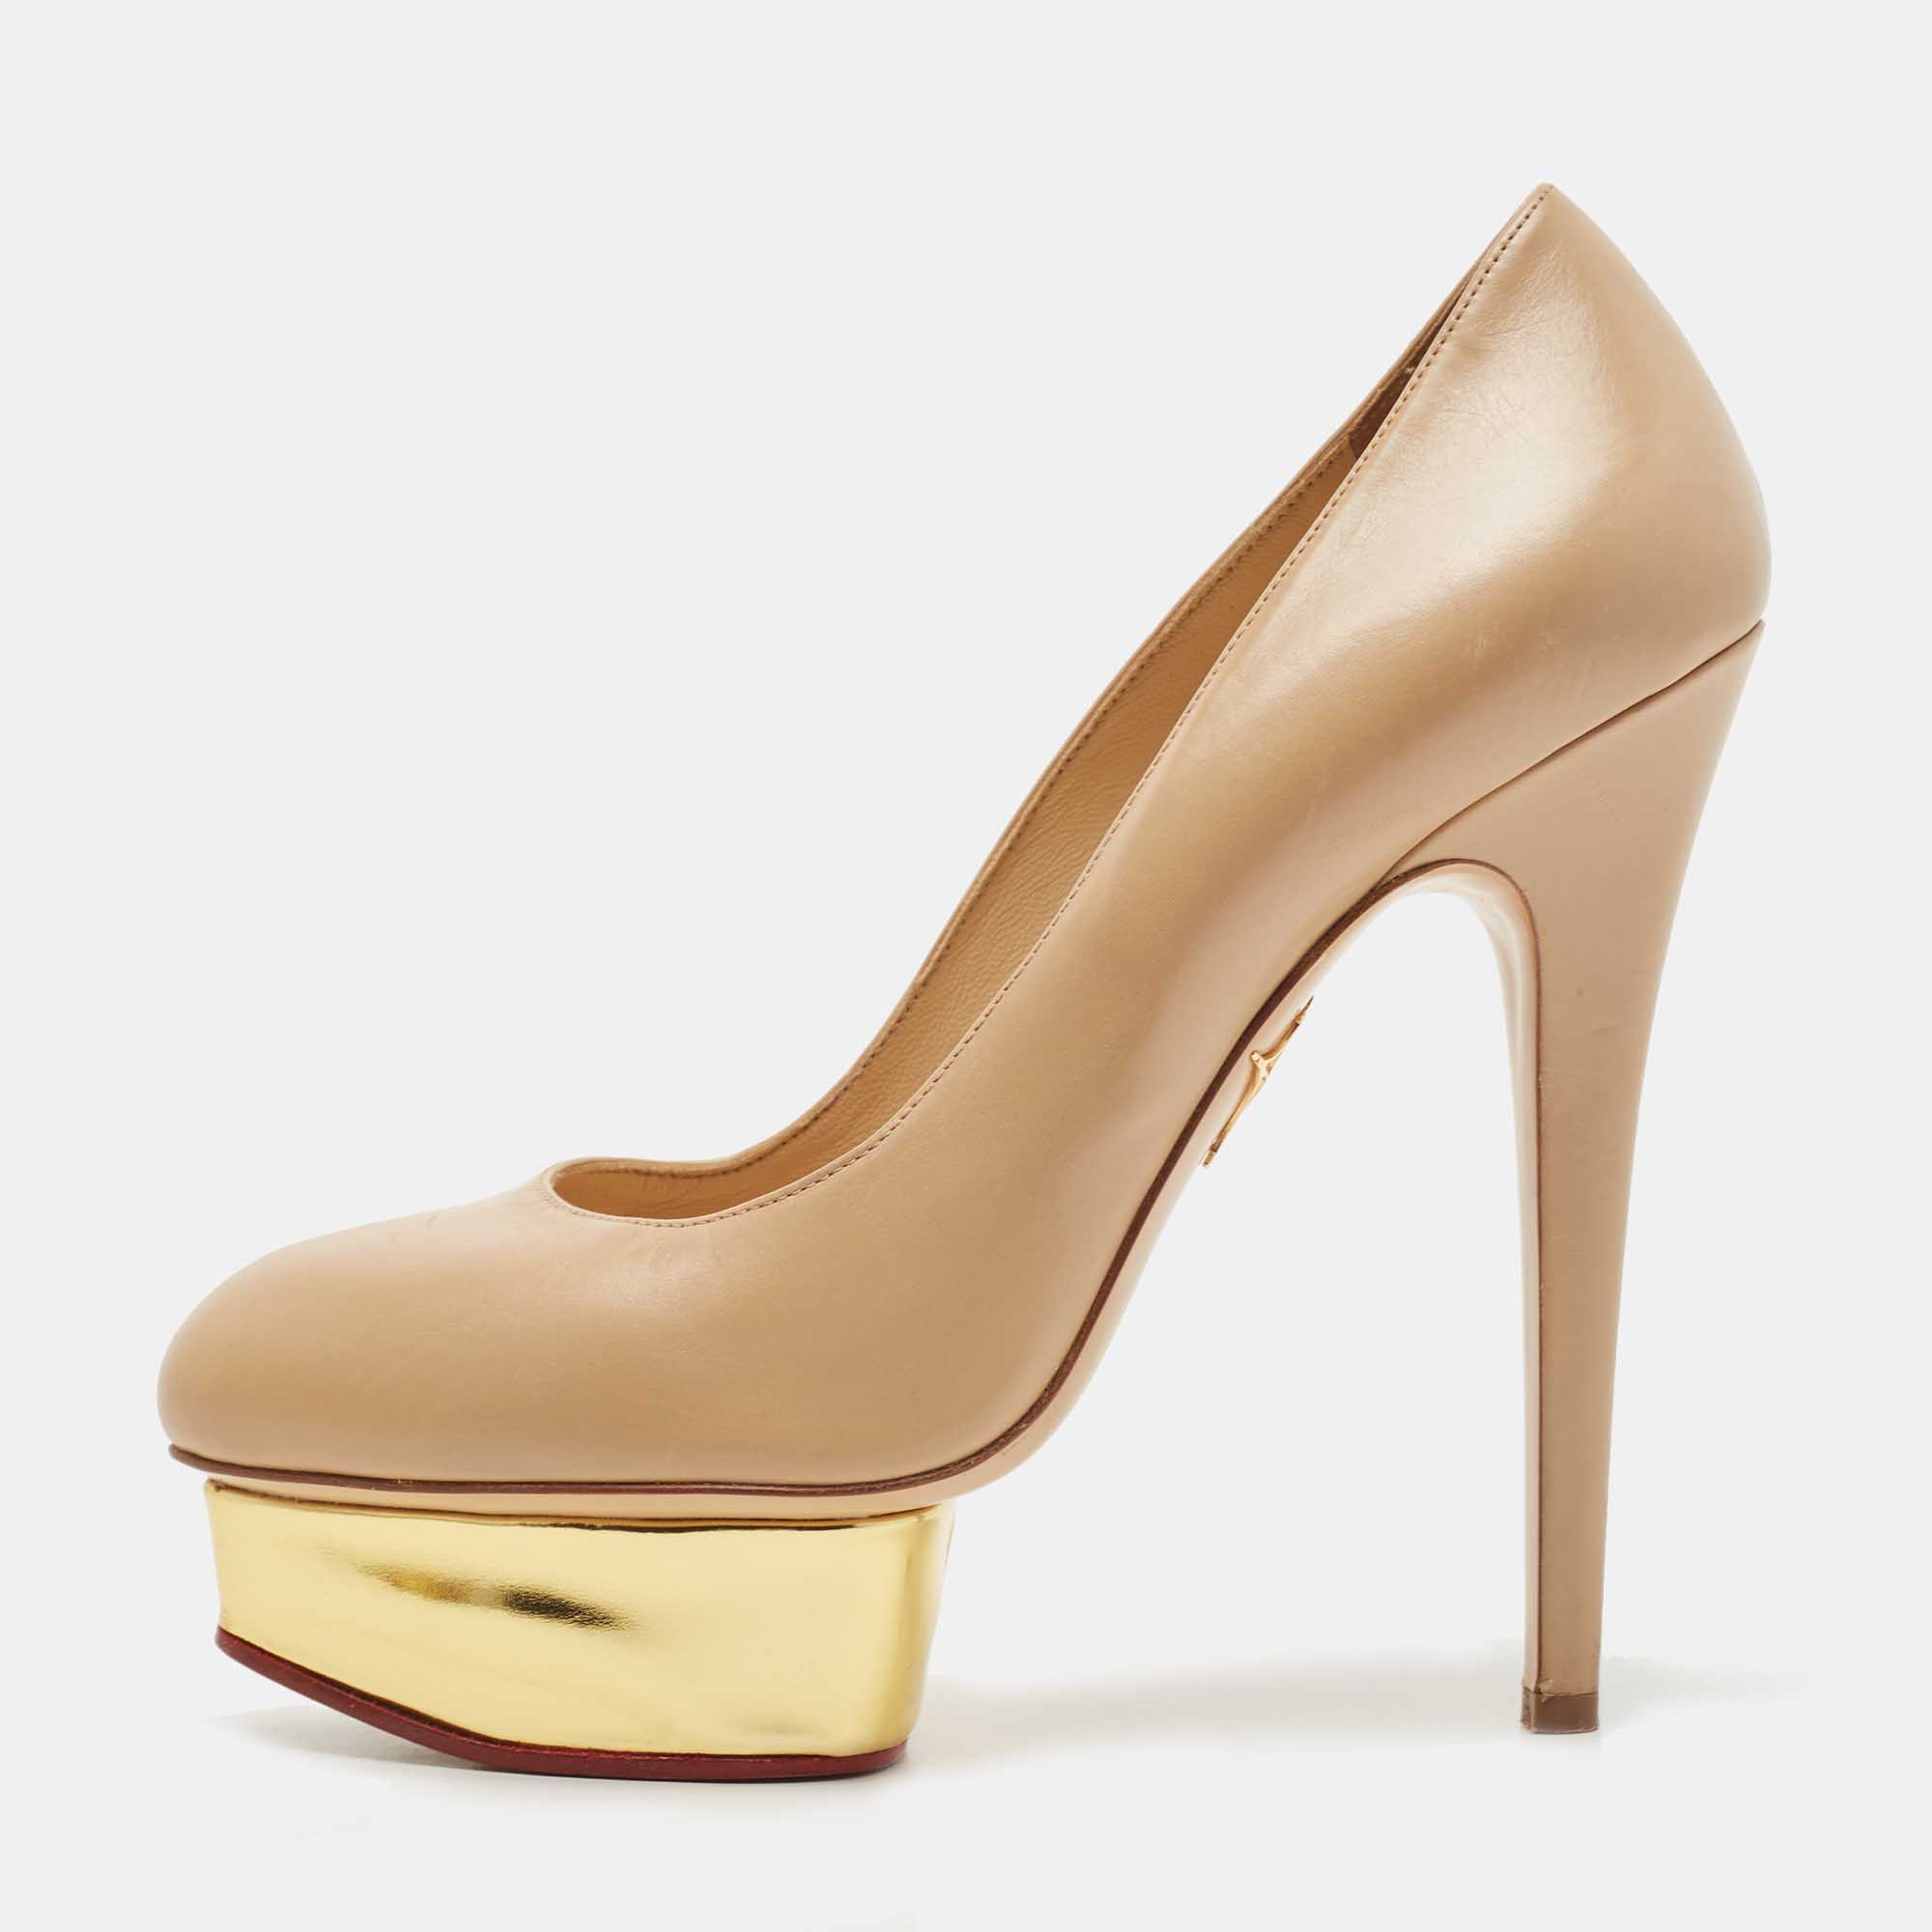 Pre-owned Charlotte Olympia Beige Leather Dolly Platform Pumps Size 38.5